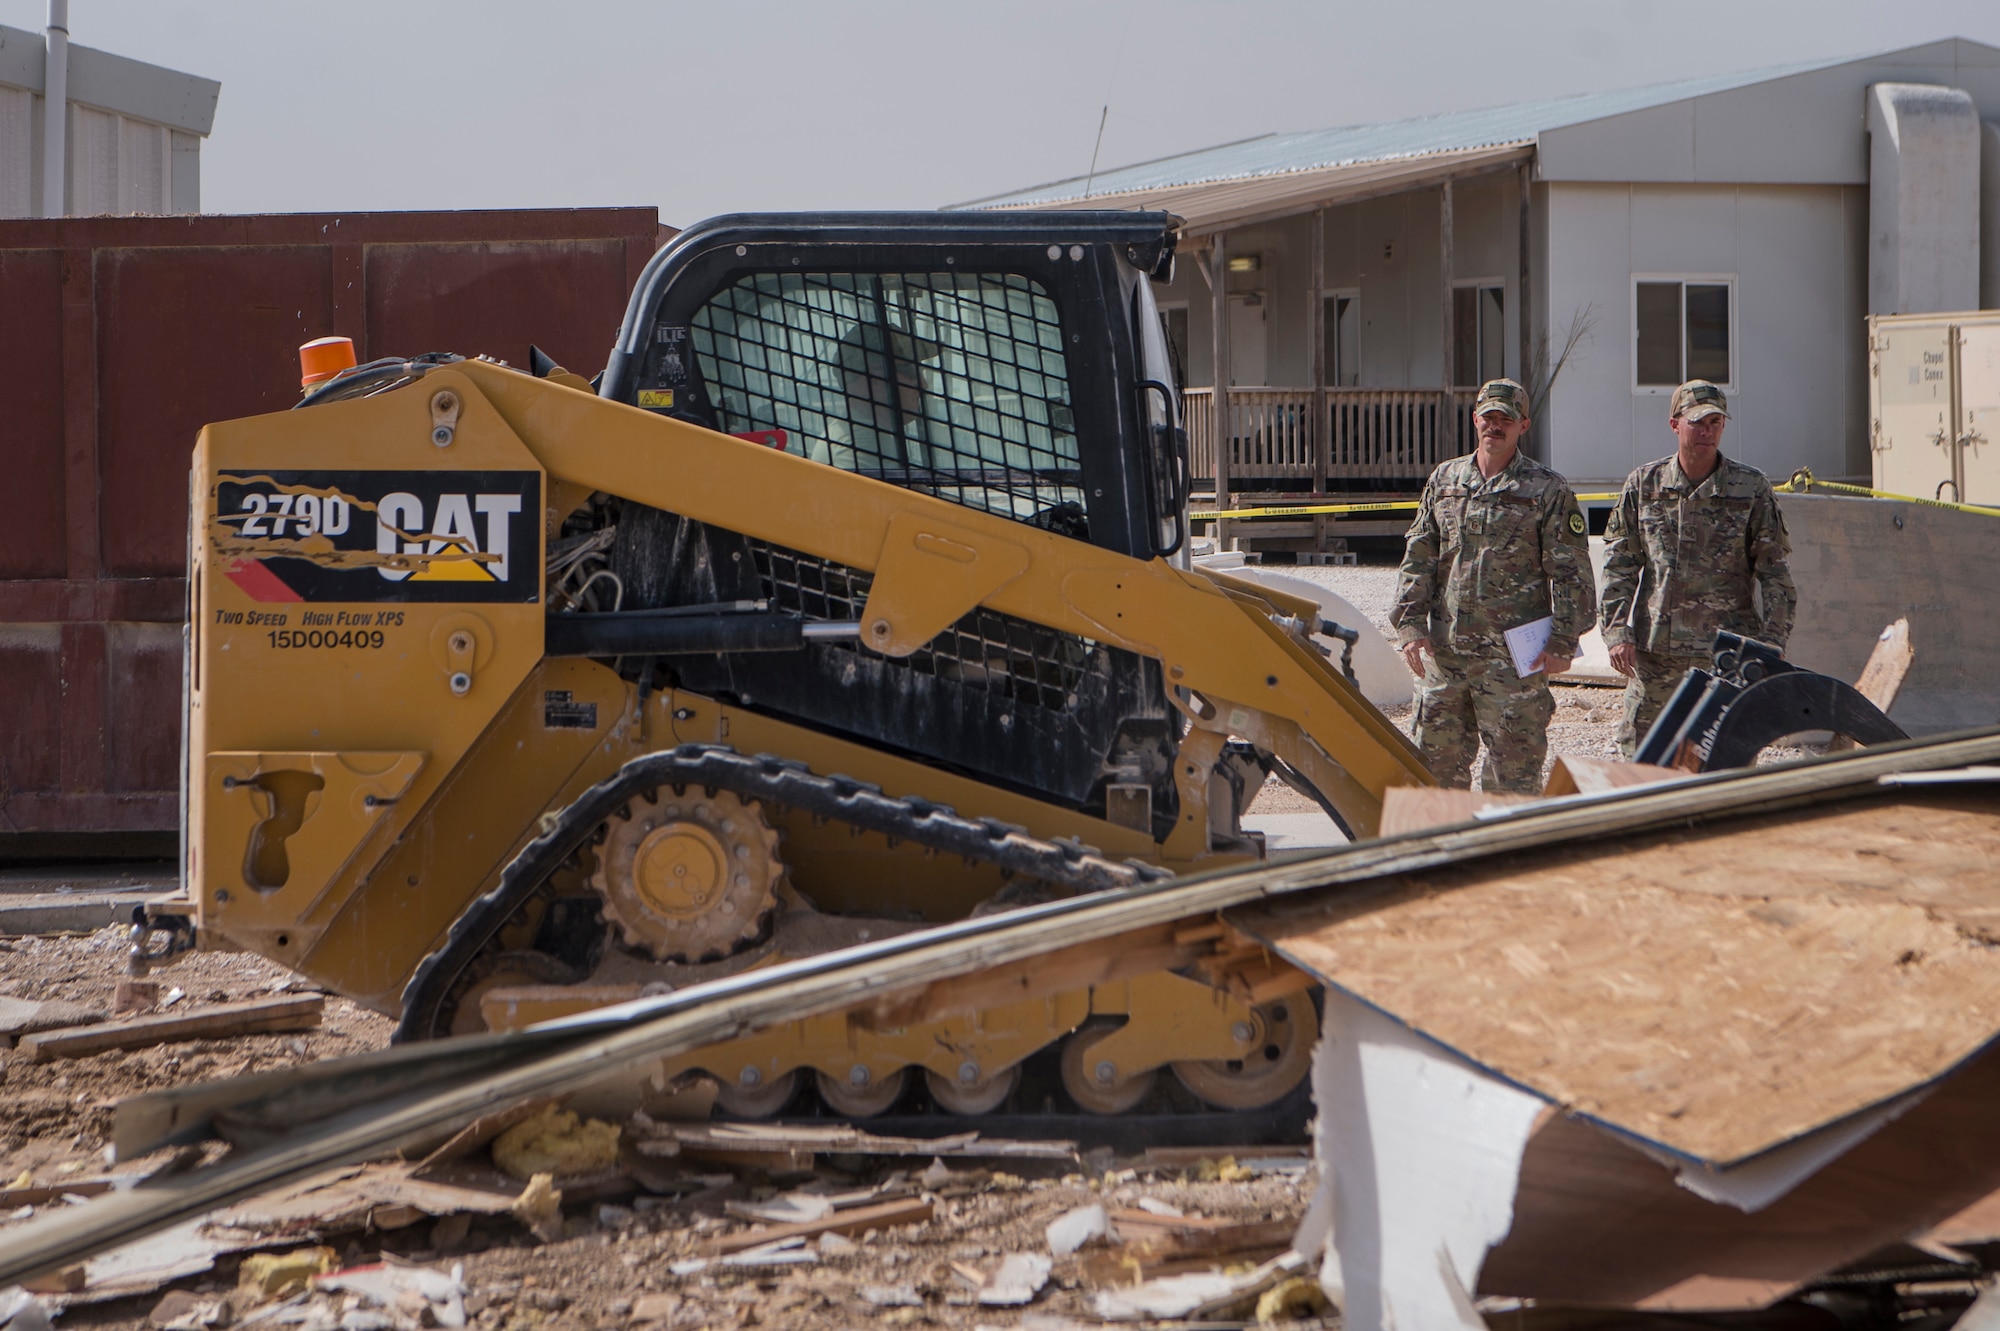 Master Sgt. Christopher Beckett, left, 379th Expeditionary Civil Engineer Squadron (ECES) heavy equipment section chief, and Tech. Sgt. John Beckett, right, 379th ECES heavy equipment project lead, check the progress of a construction site March 27, 2019, at Al Udeid Air Base, Qatar. The brothers, who have served in the Arizona Air National Guard since 2003, are currently deployed together to the same ECES unit at Al Udeid Air Base. (U.S. Air Force photo by Tech. Sgt. Christopher Hubenthal)